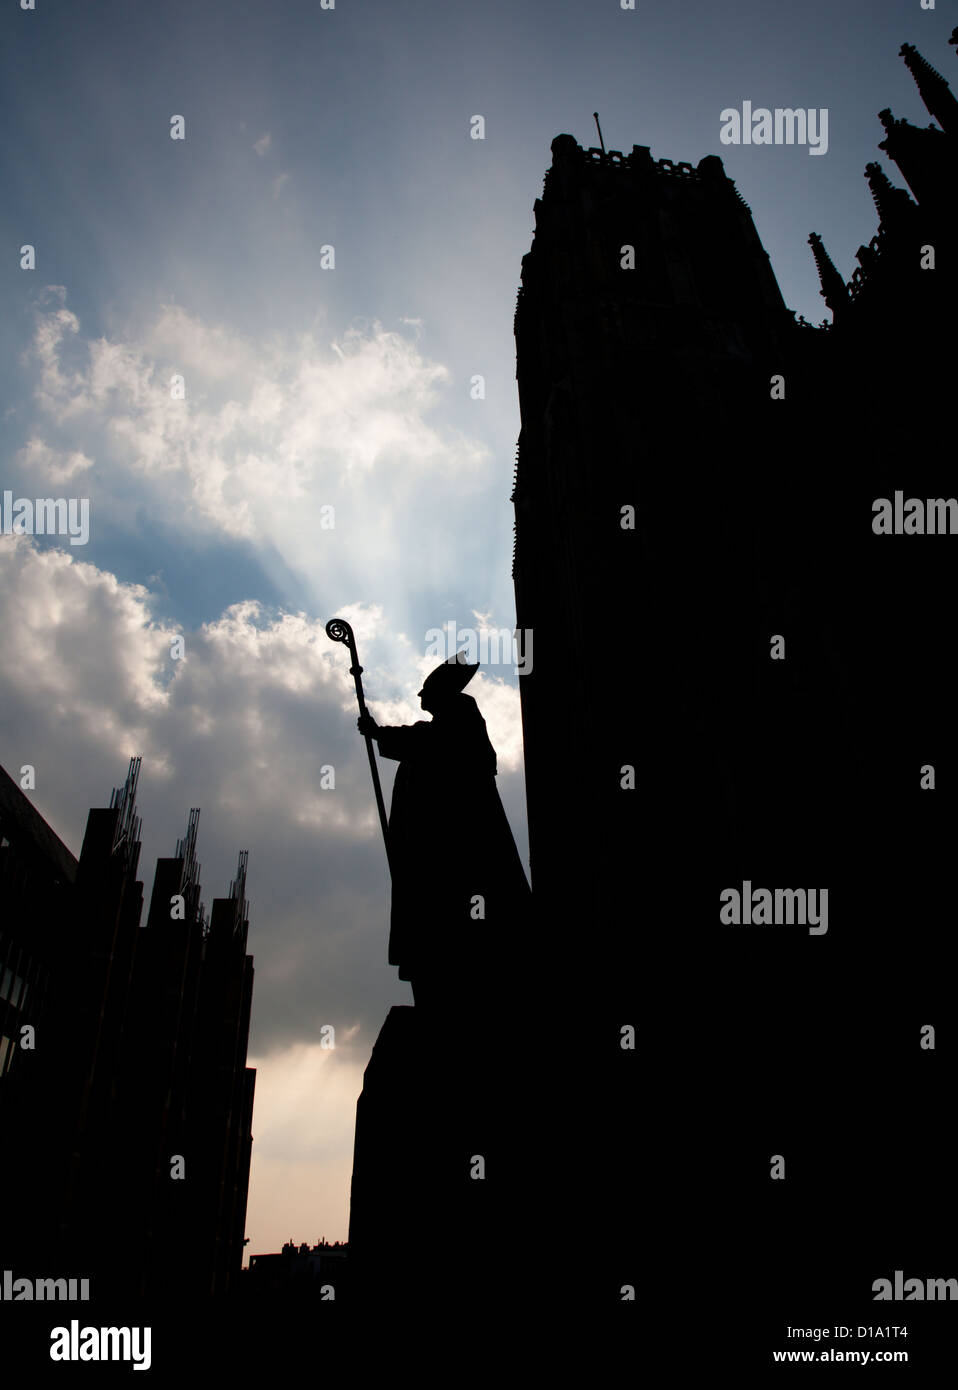 Brussels - cardinal Mercier statue by st. Michaels cathedral - silhouette Stock Photo